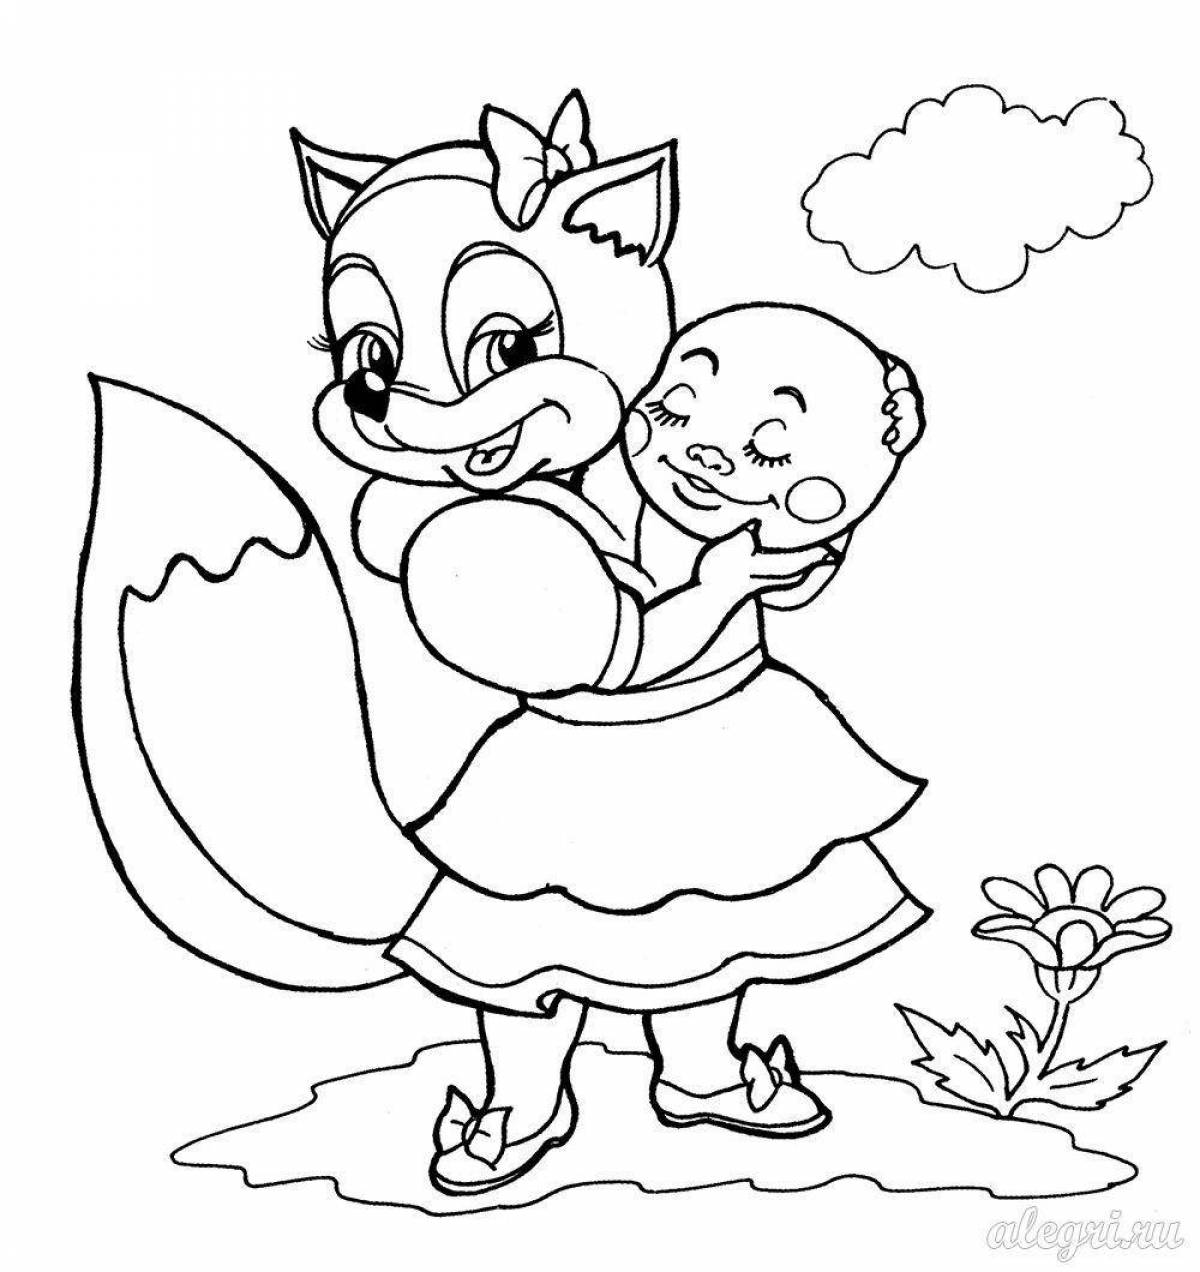 Exciting fox and rabbit coloring book